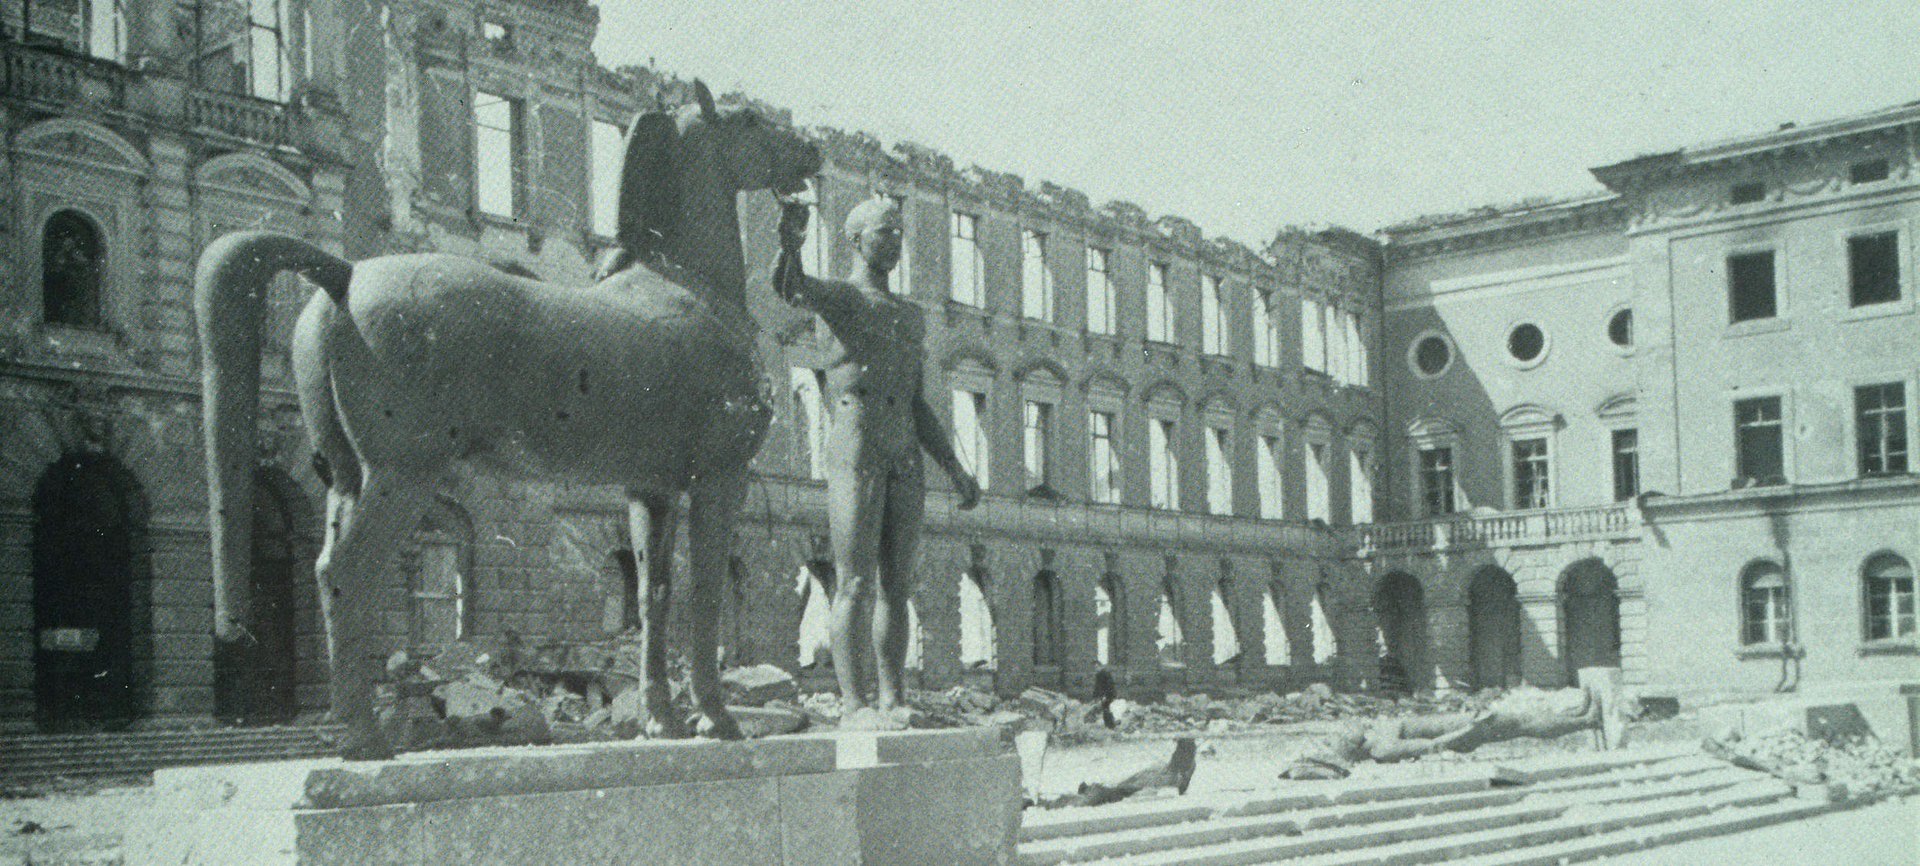 The destroyed main building after the Second World War around 1945.